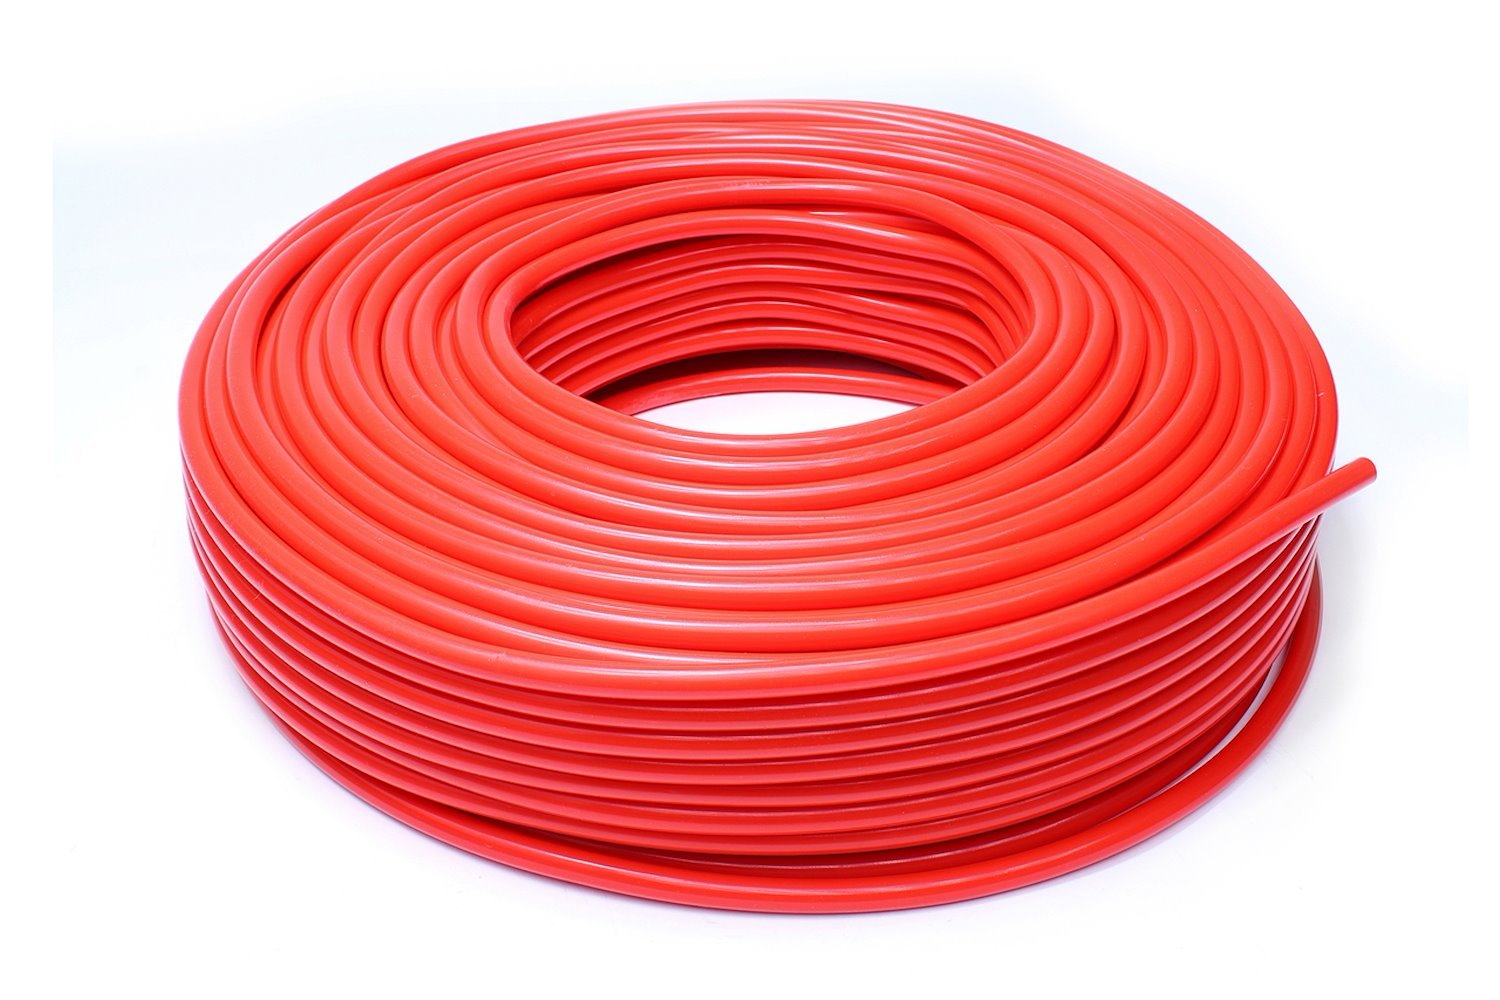 HTSVH35-REDx50 High-Temperature Silicone Vacuum Hose Tubing, 3.5 mm ID, 50 ft. Roll, Red